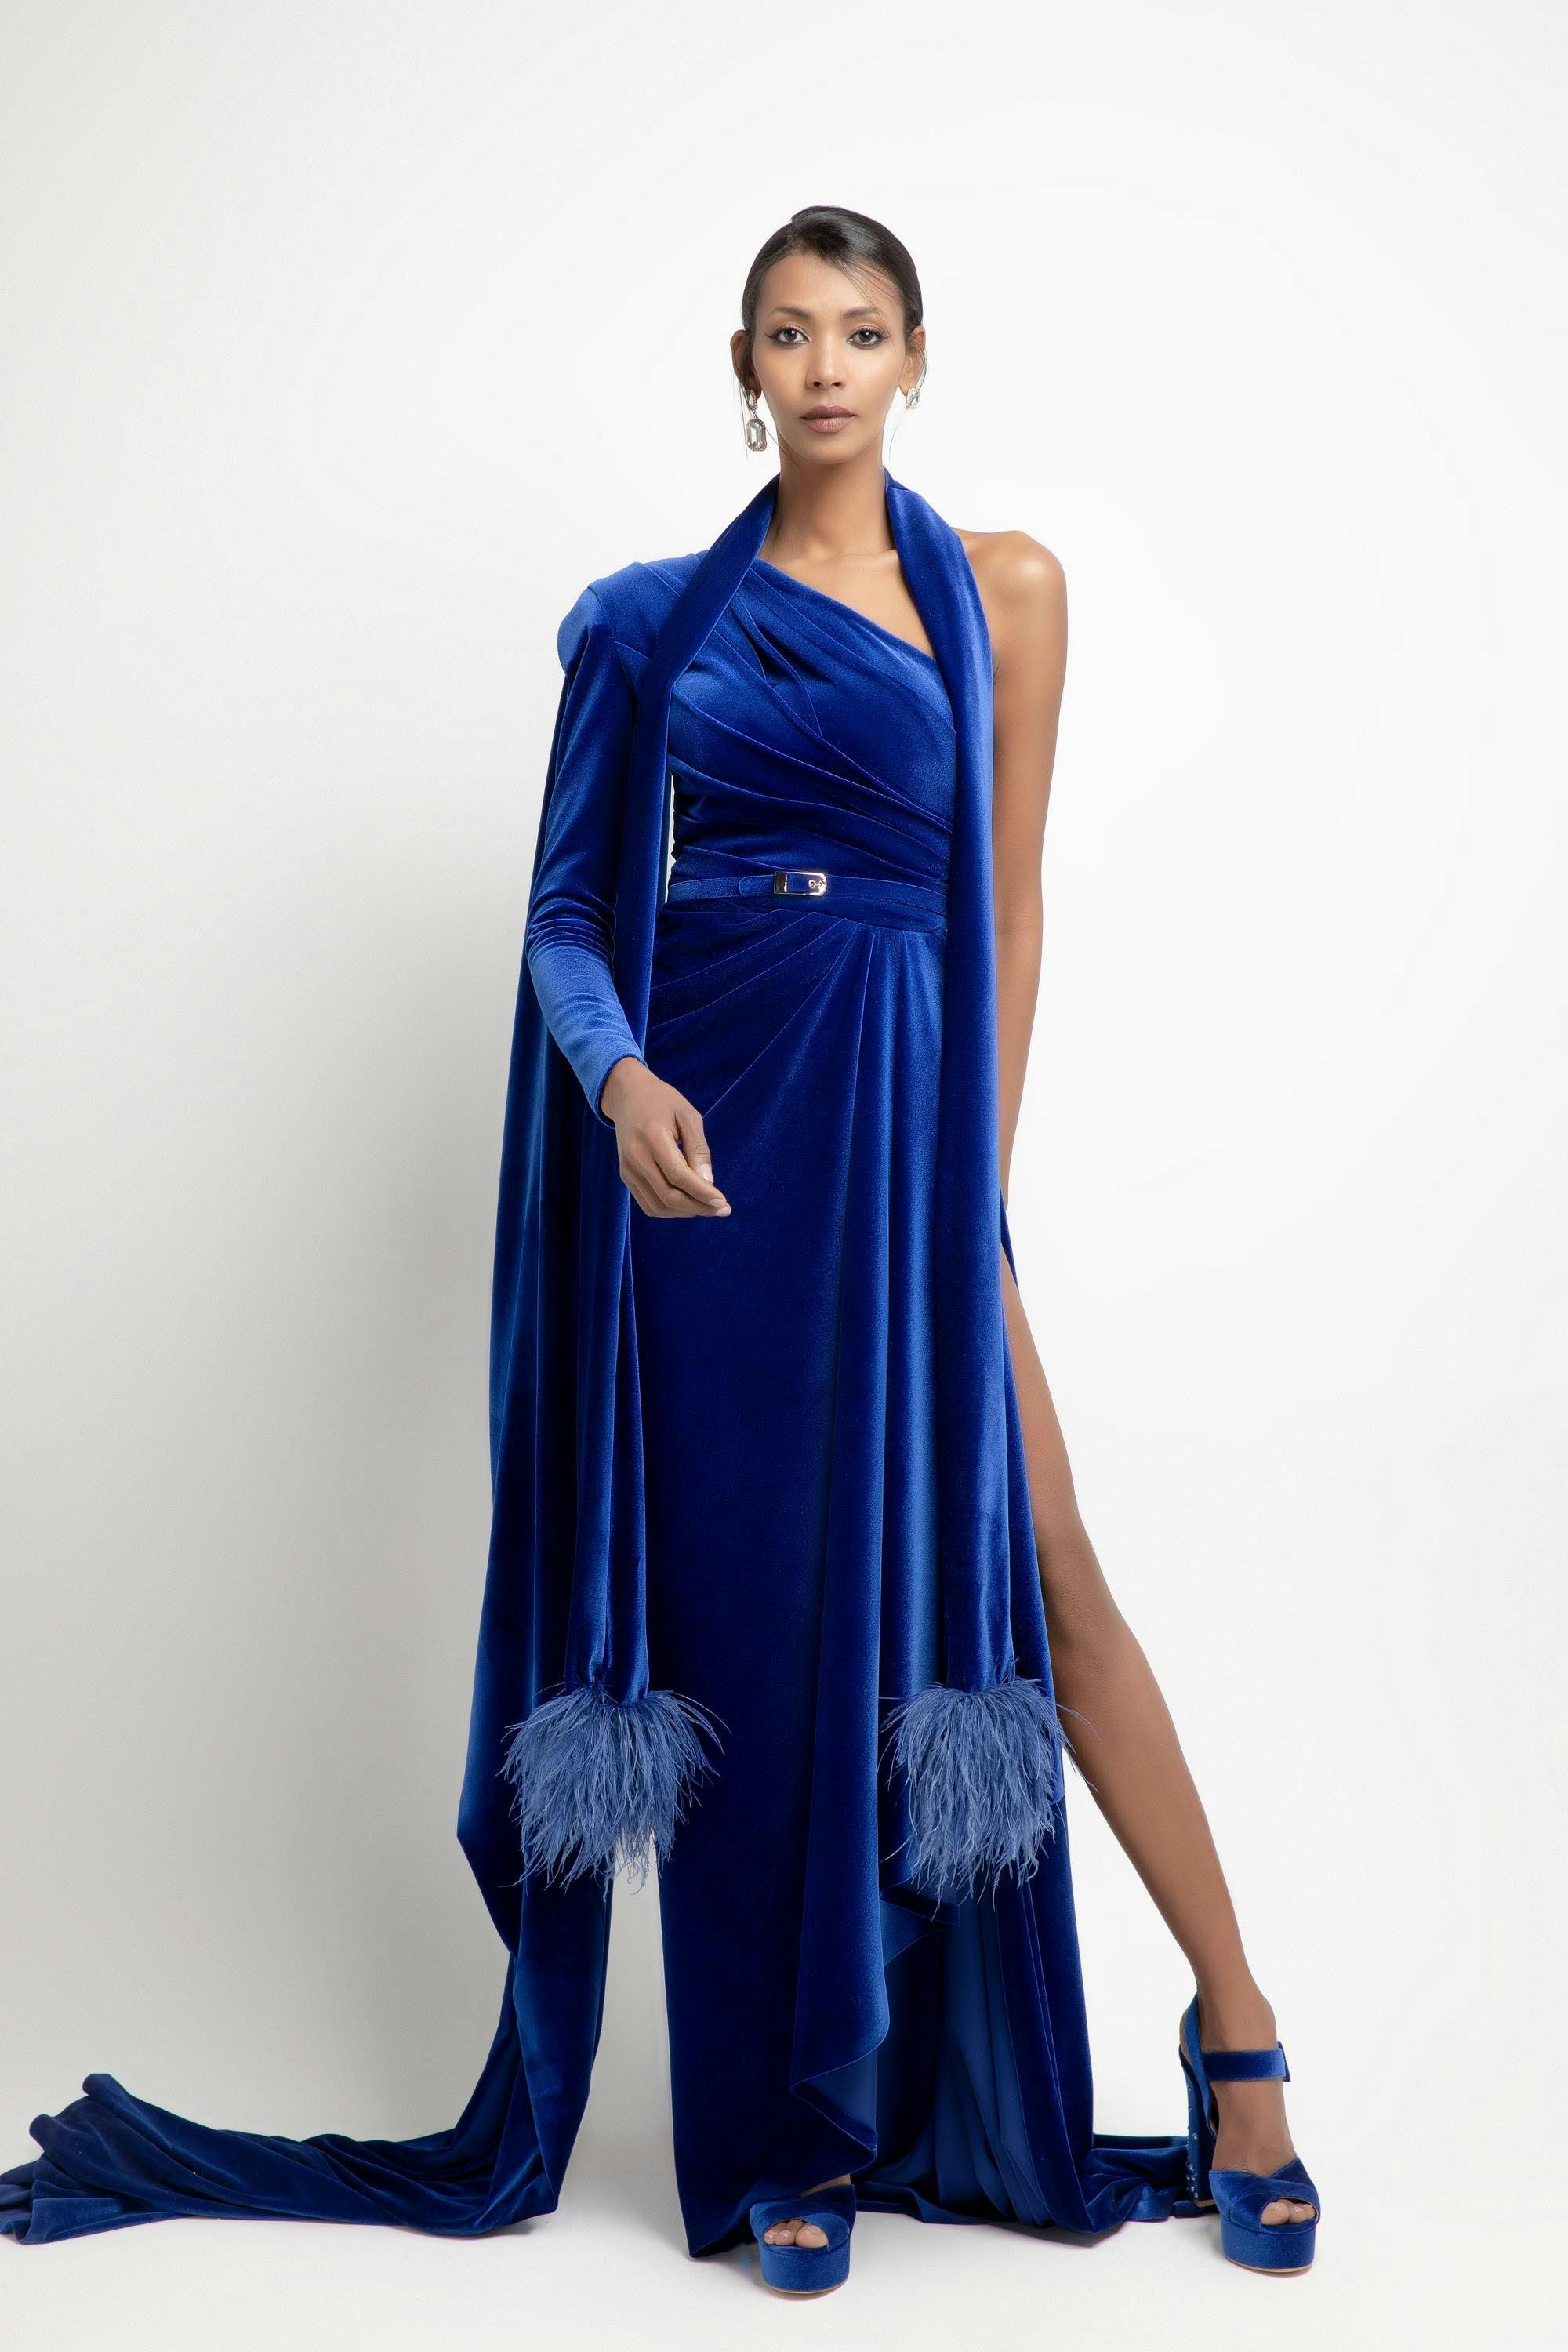 Look 6 - Jean Fares Couture- JFC-elegant, one-shoulder velvet bleu dress with belt and a tail